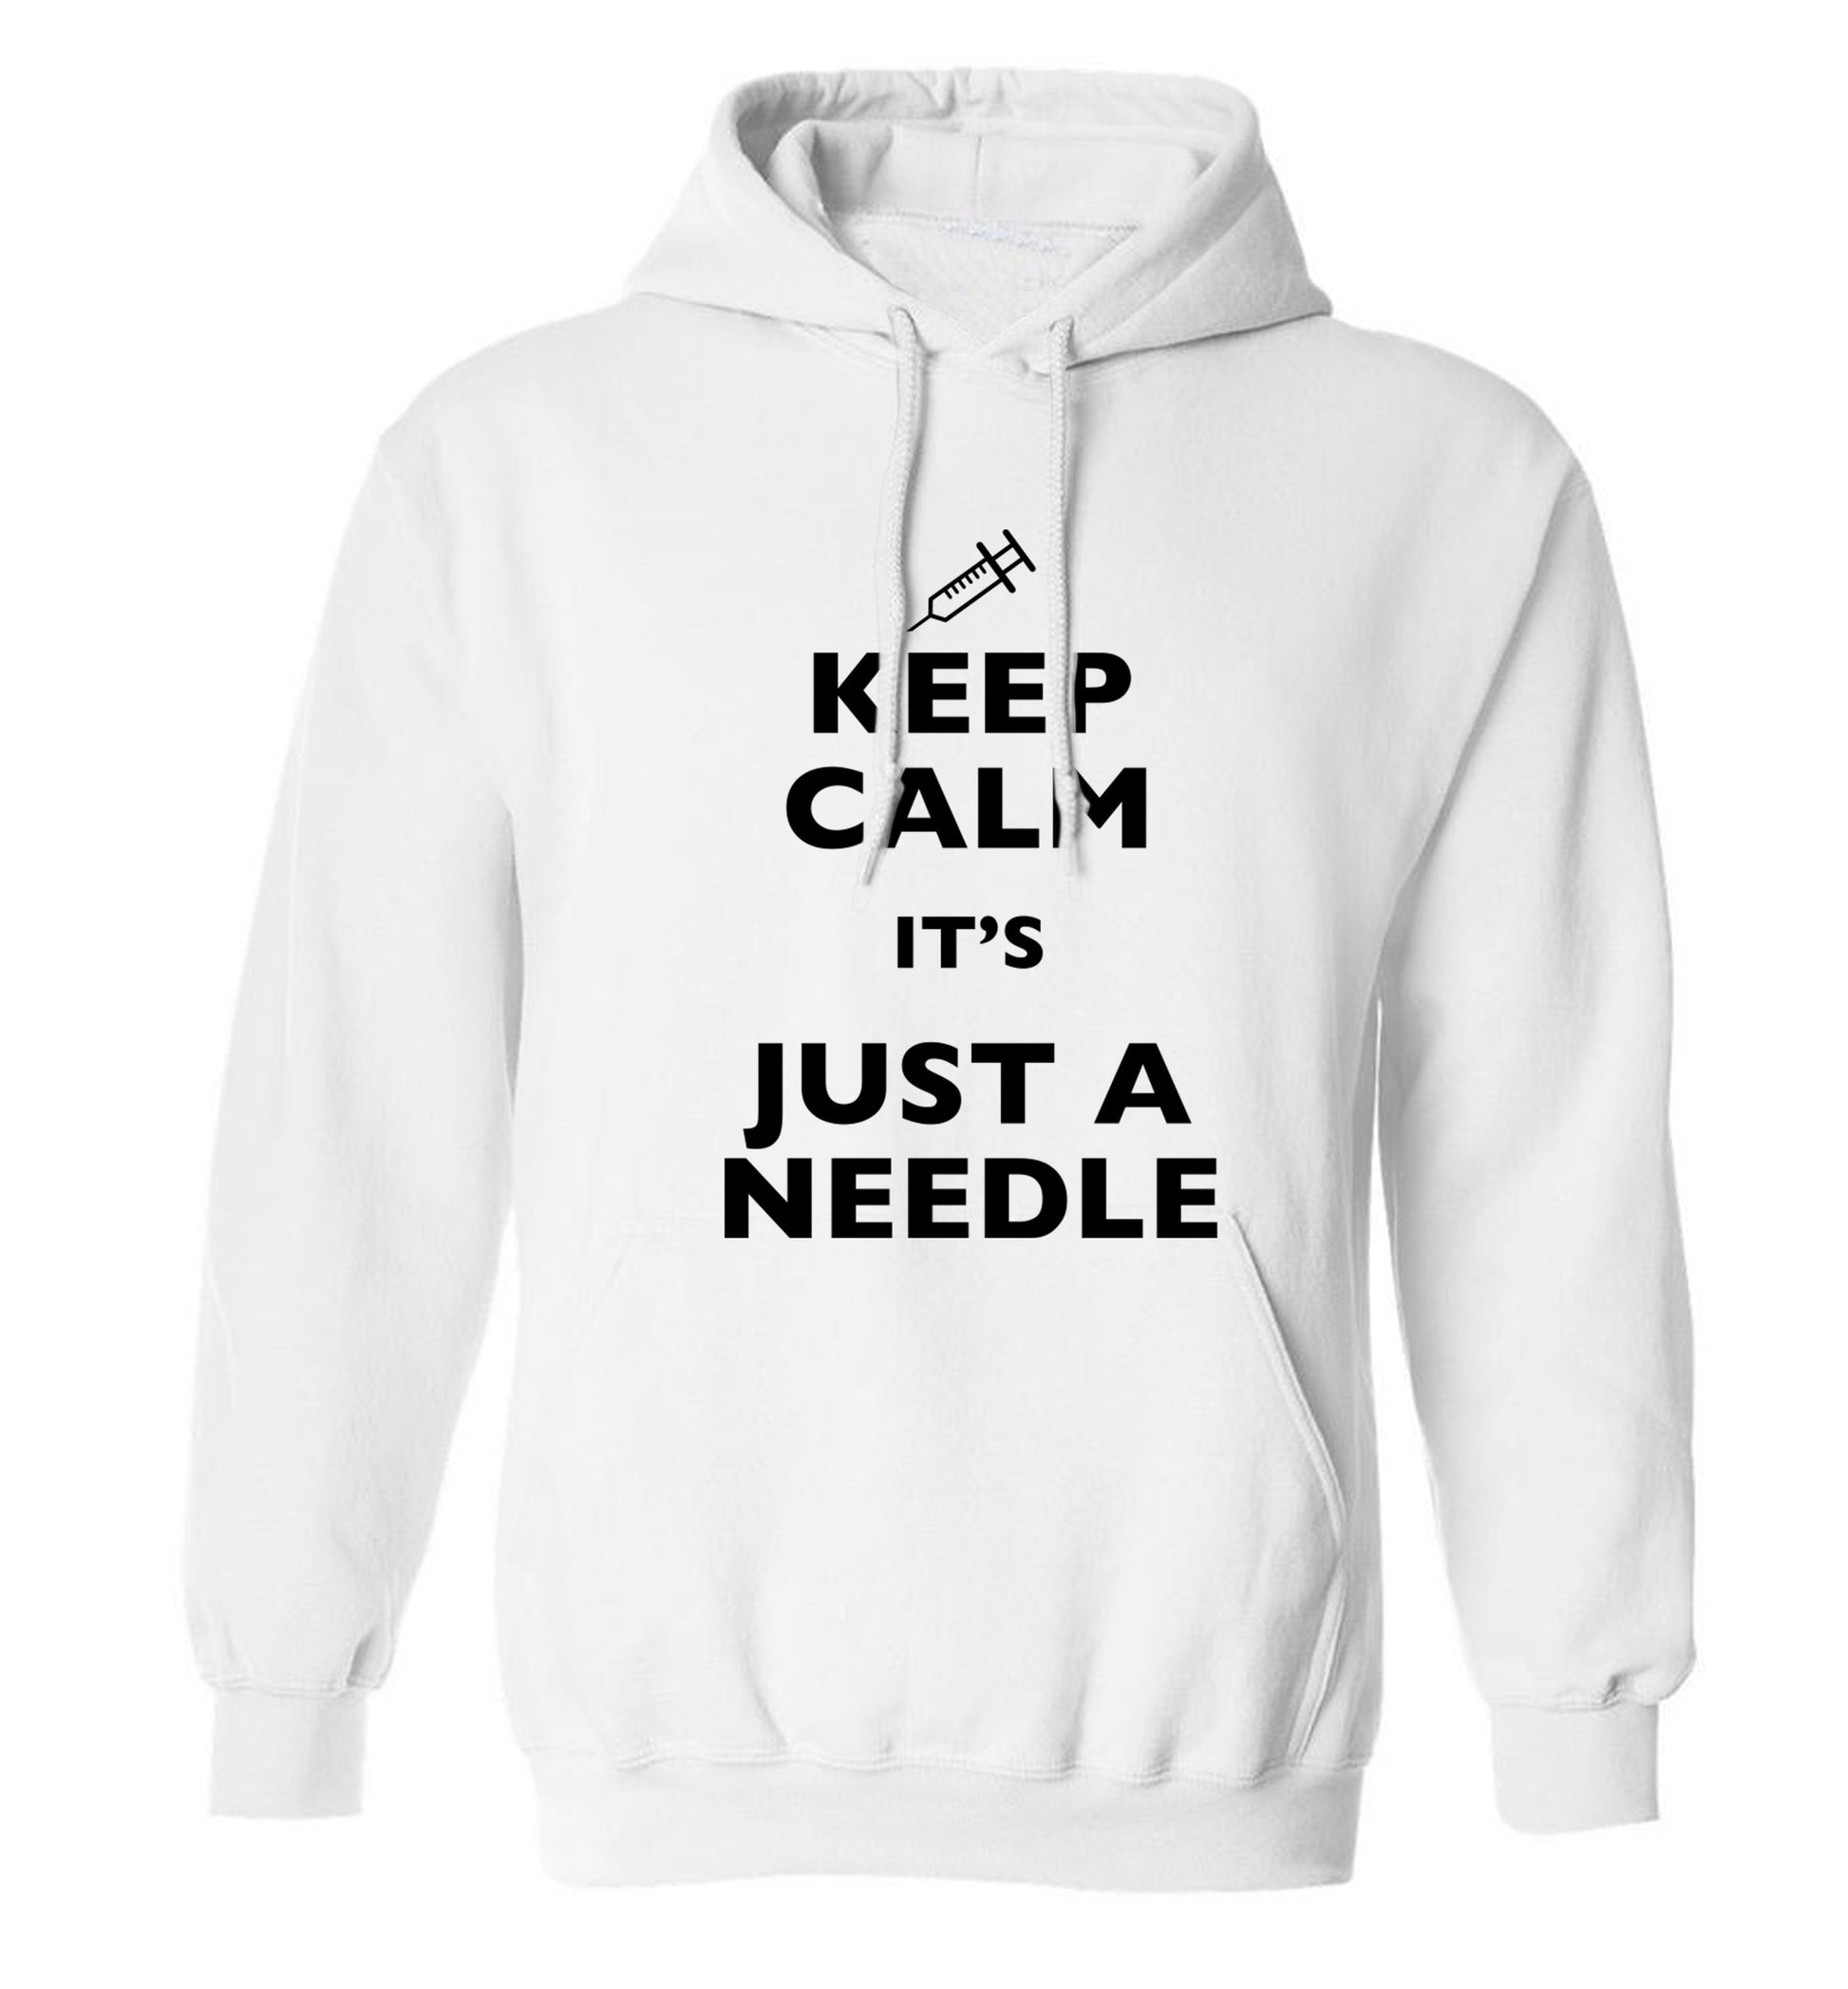 Keep calm it's only a needle adults unisex white hoodie 2XL